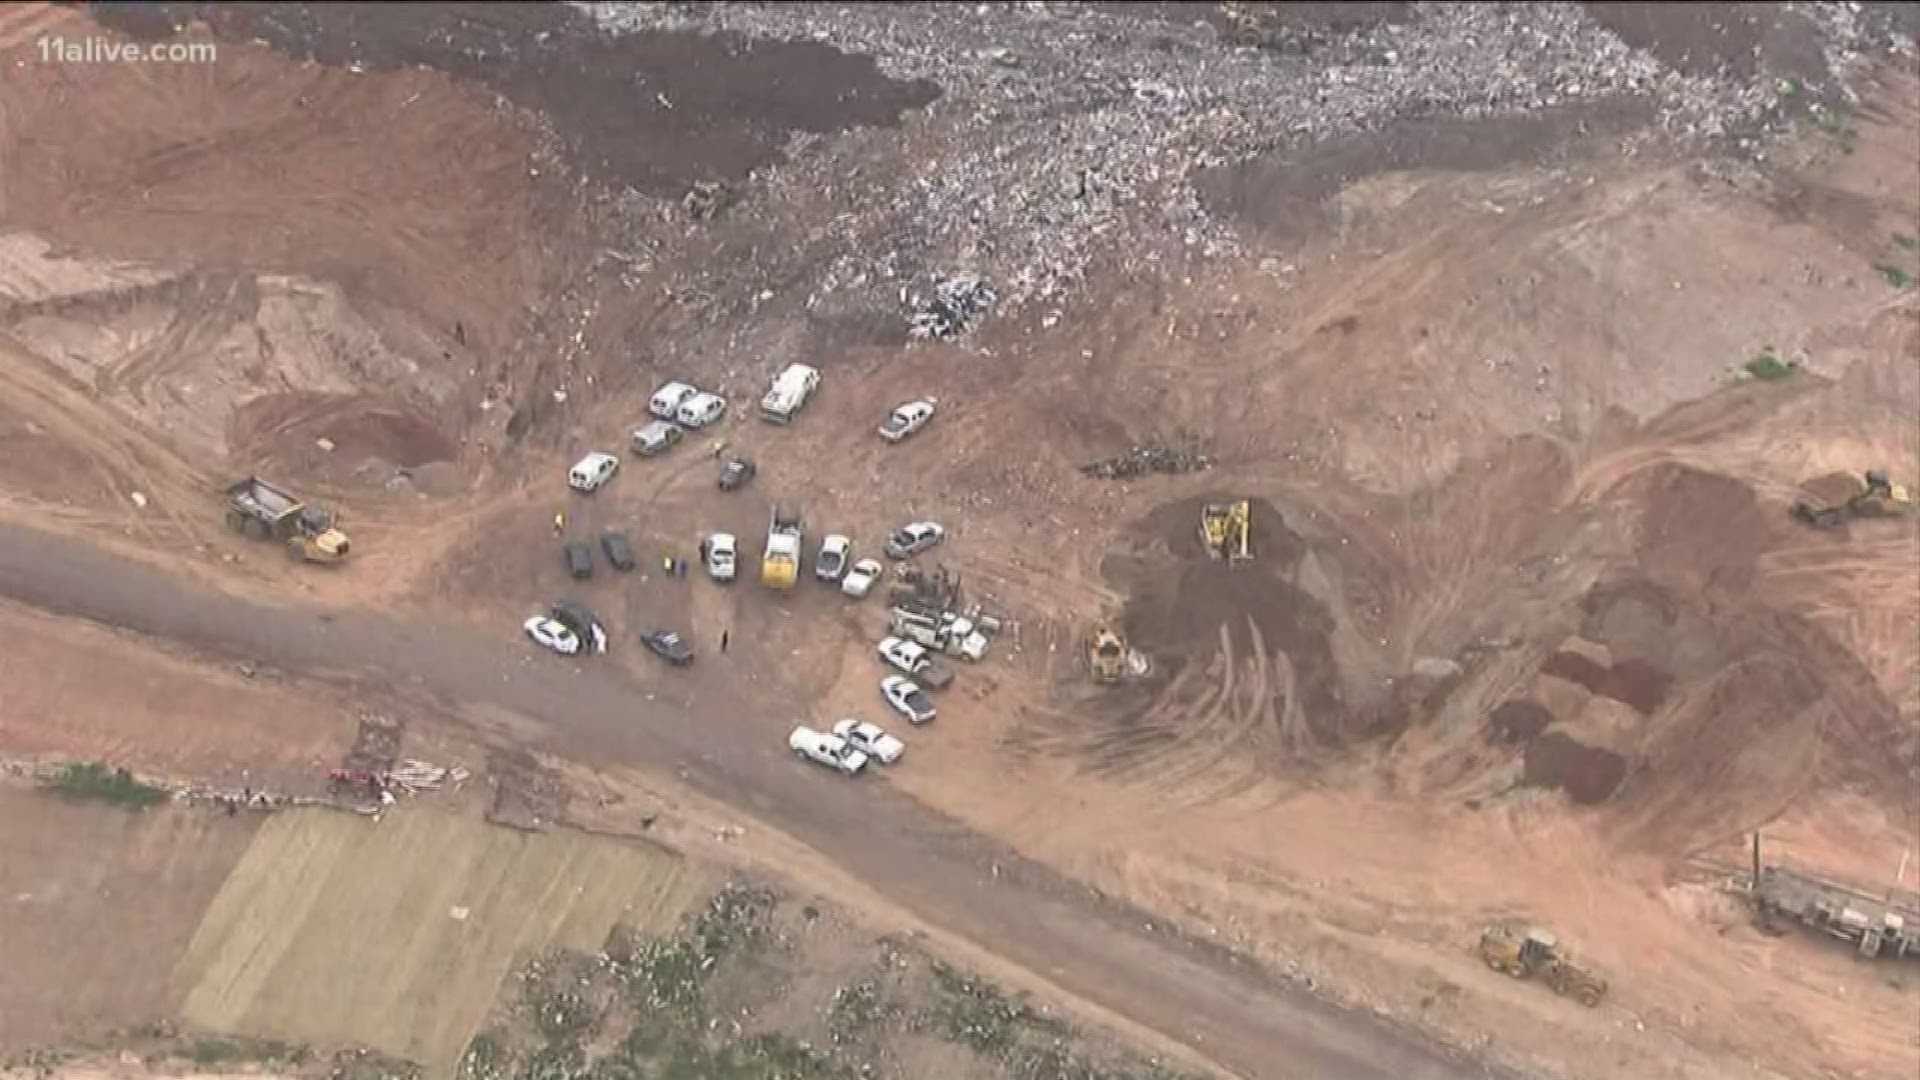 Workers discovered the body in an area where garbage trucks typically dump their loads.